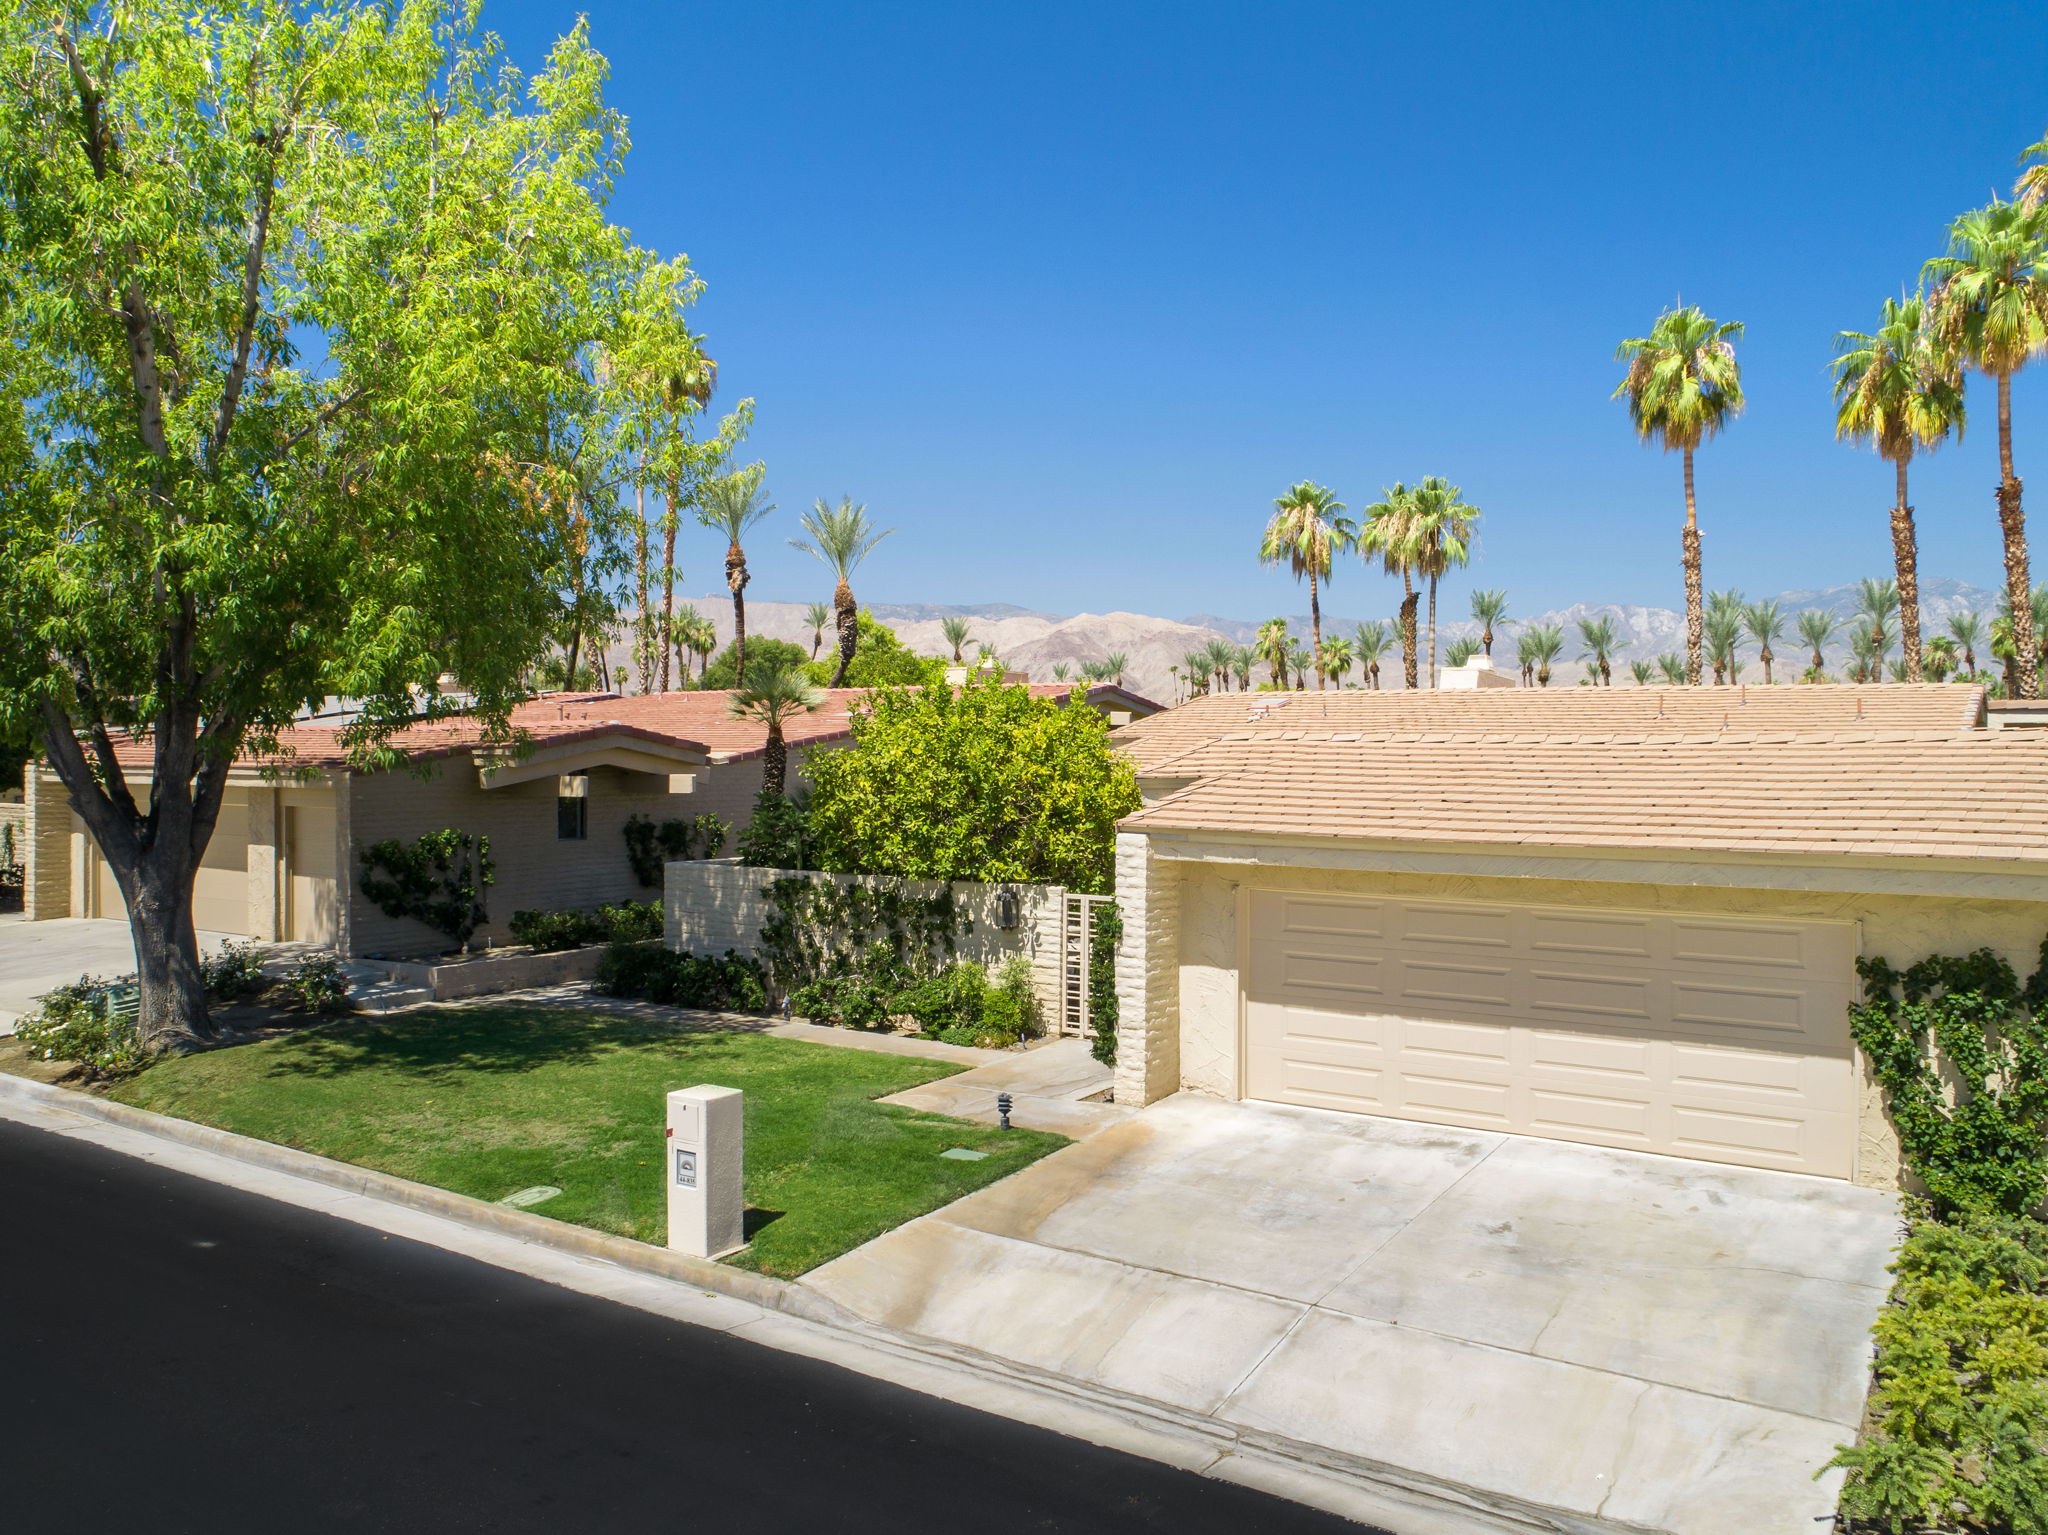  44835 Guadalupe Dr, Indian Wells, CA 92210, US Photo 6